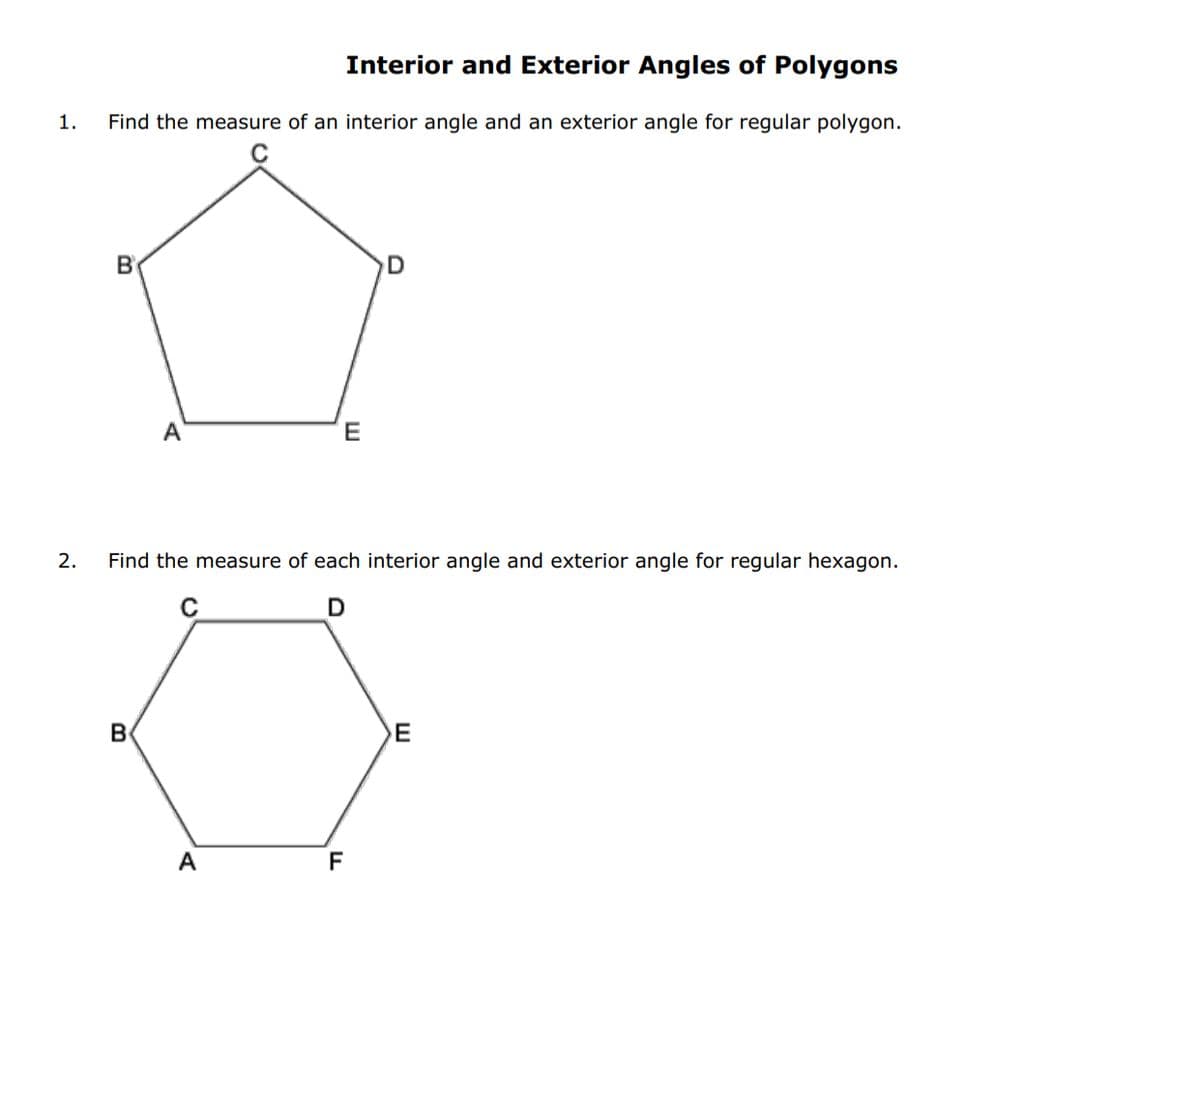 1.
2.
Interior and Exterior Angles of Polygons
Find the measure of an interior angle and an exterior angle for regular polygon.
B
A
B
E
Find the measure of each interior angle and exterior angle for regular hexagon.
D
A
D
E